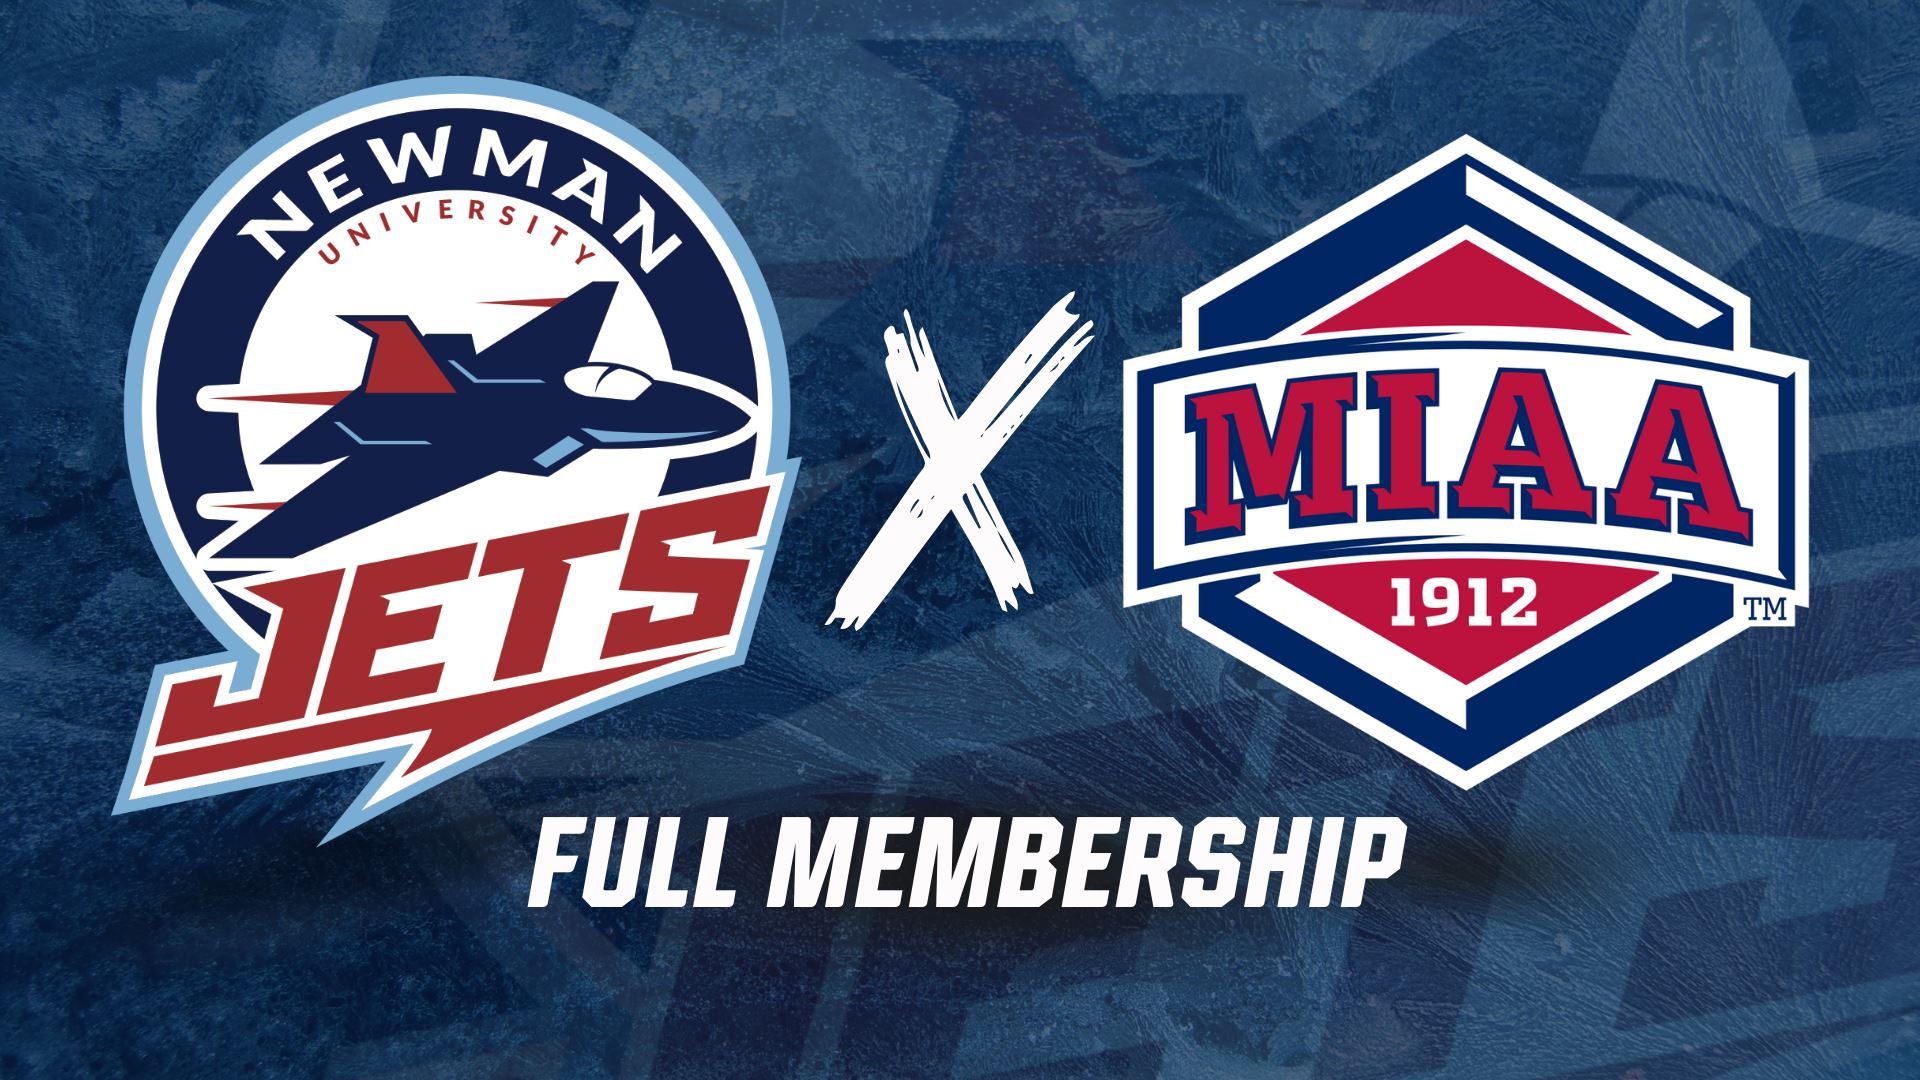 Newman becomes full members of MIAA conference